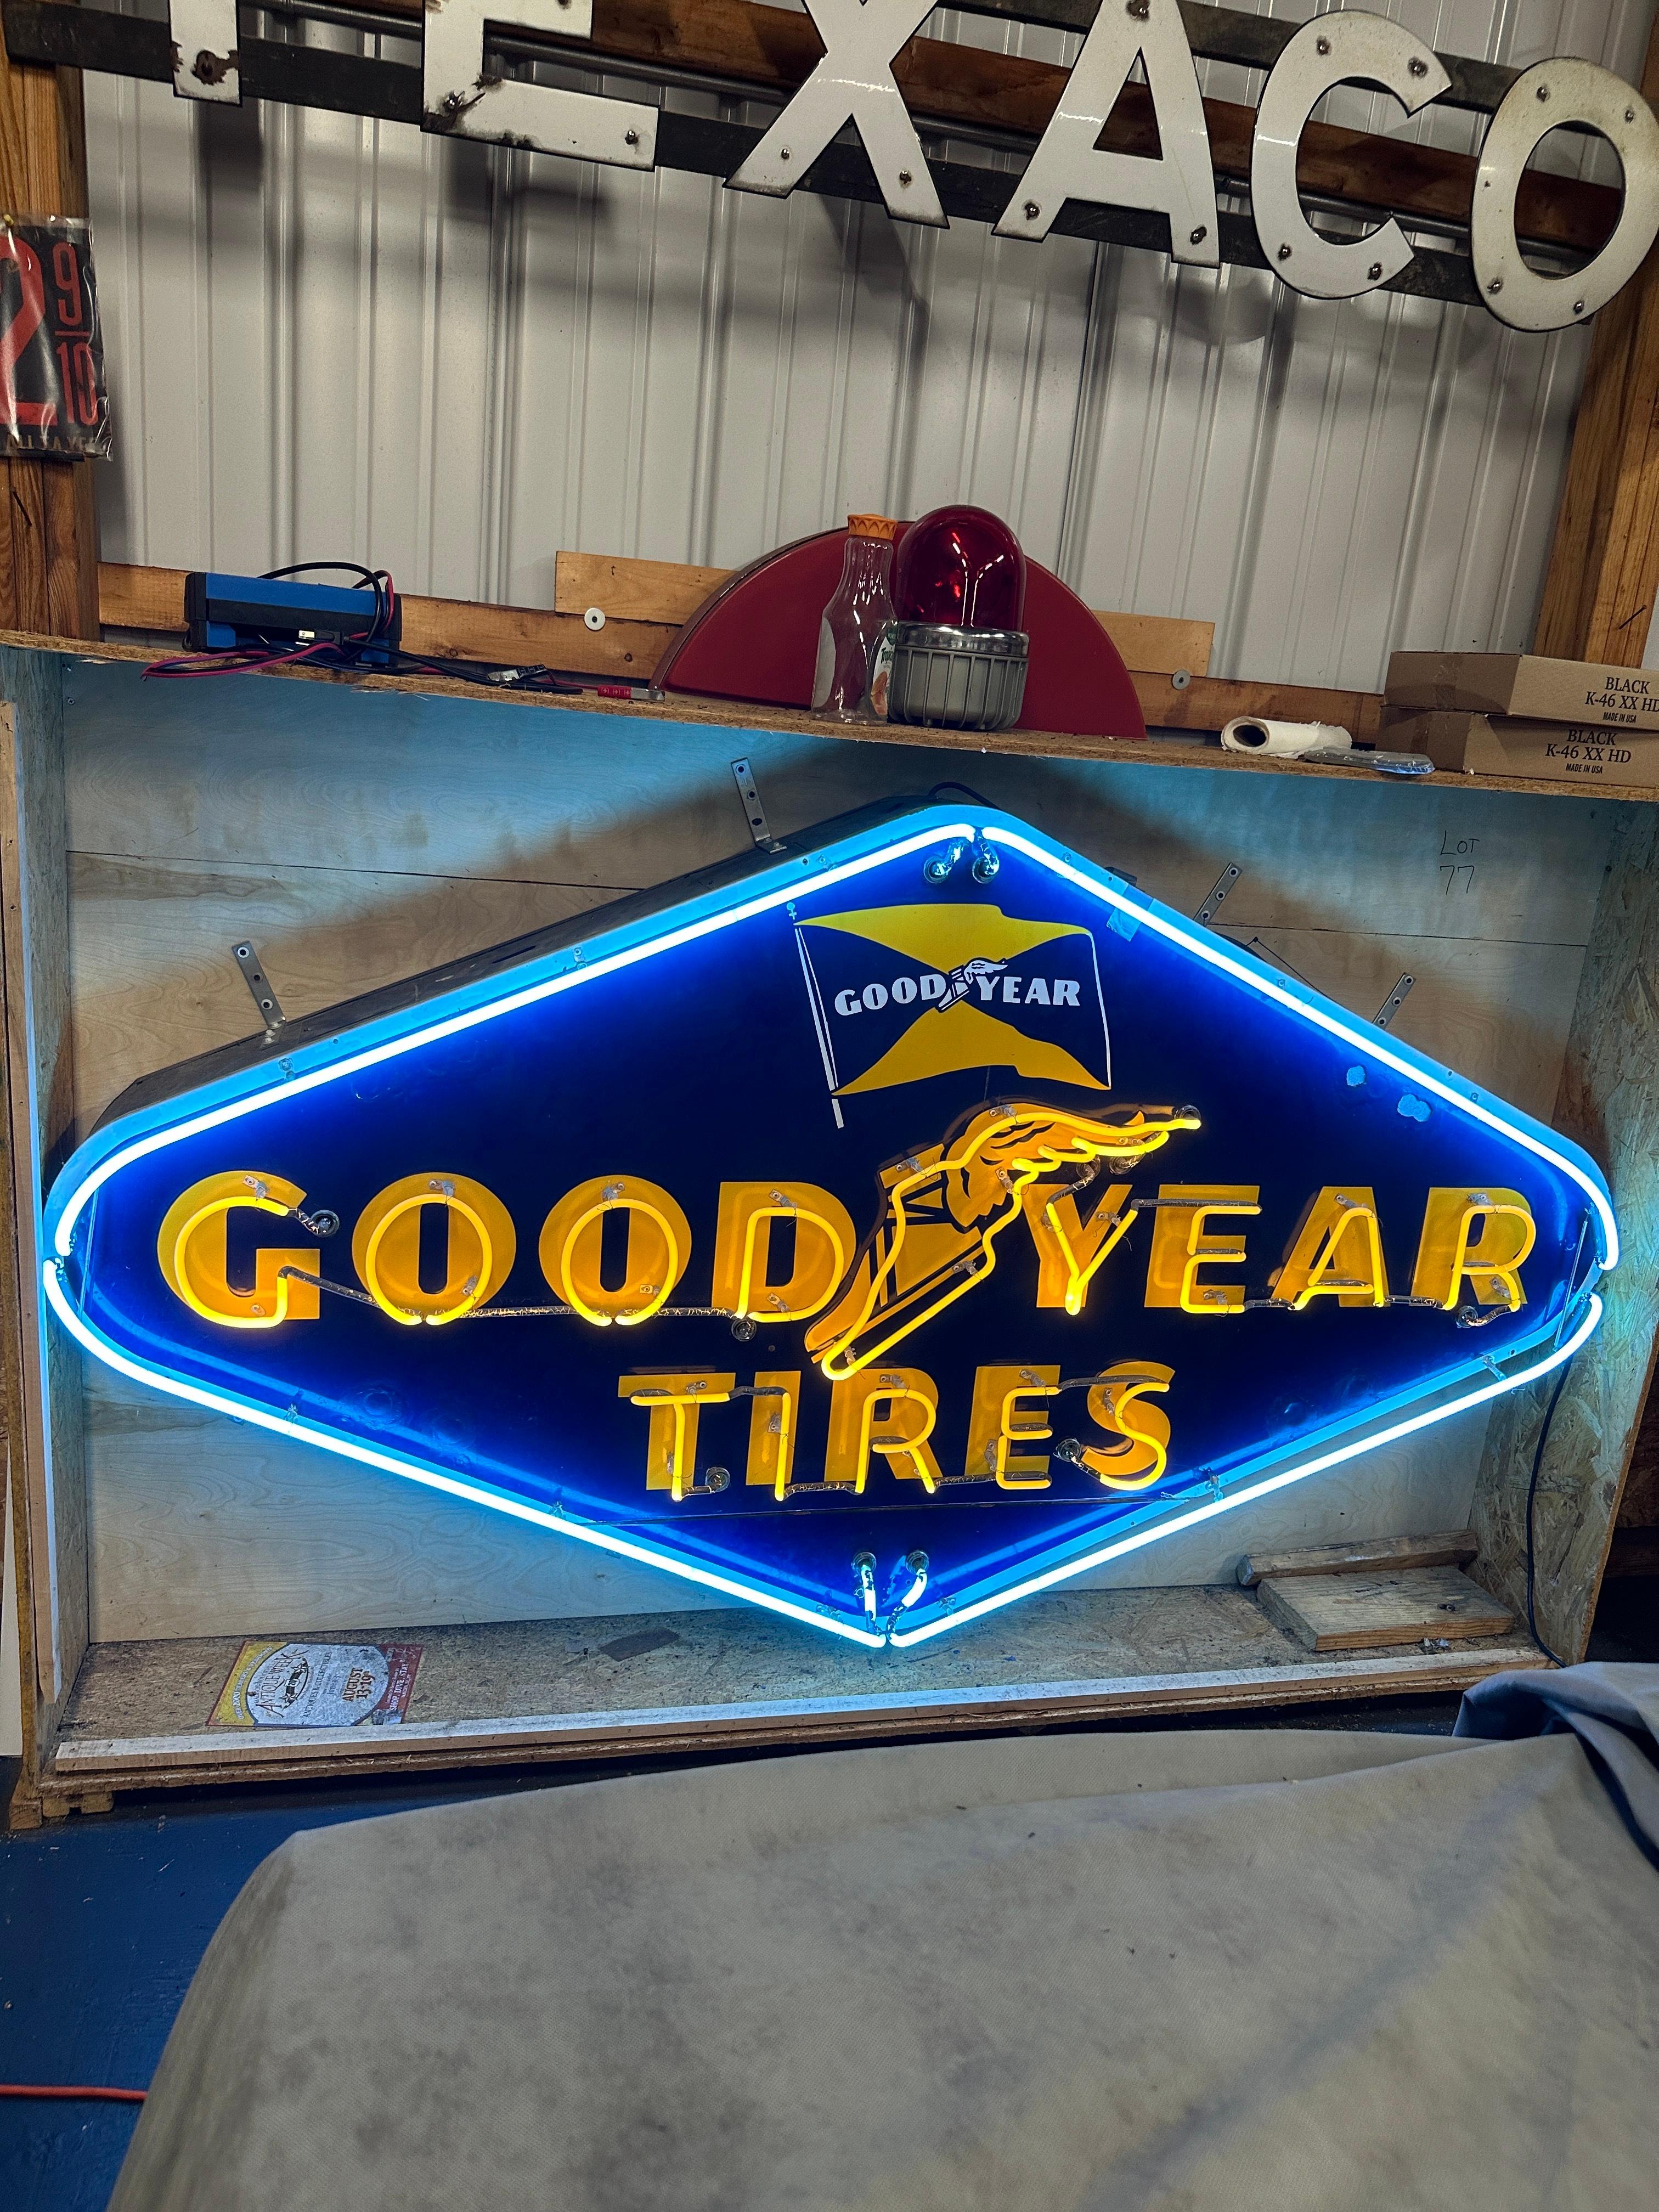 Very rare and beautiful example of a 1940's Goodyear Tires Neon light porcelain advertisement sign. Few occasional chips to porcelain finish and associate light/minor wear. Otherwise, this is a very good example of Goodyear Tires advertisement